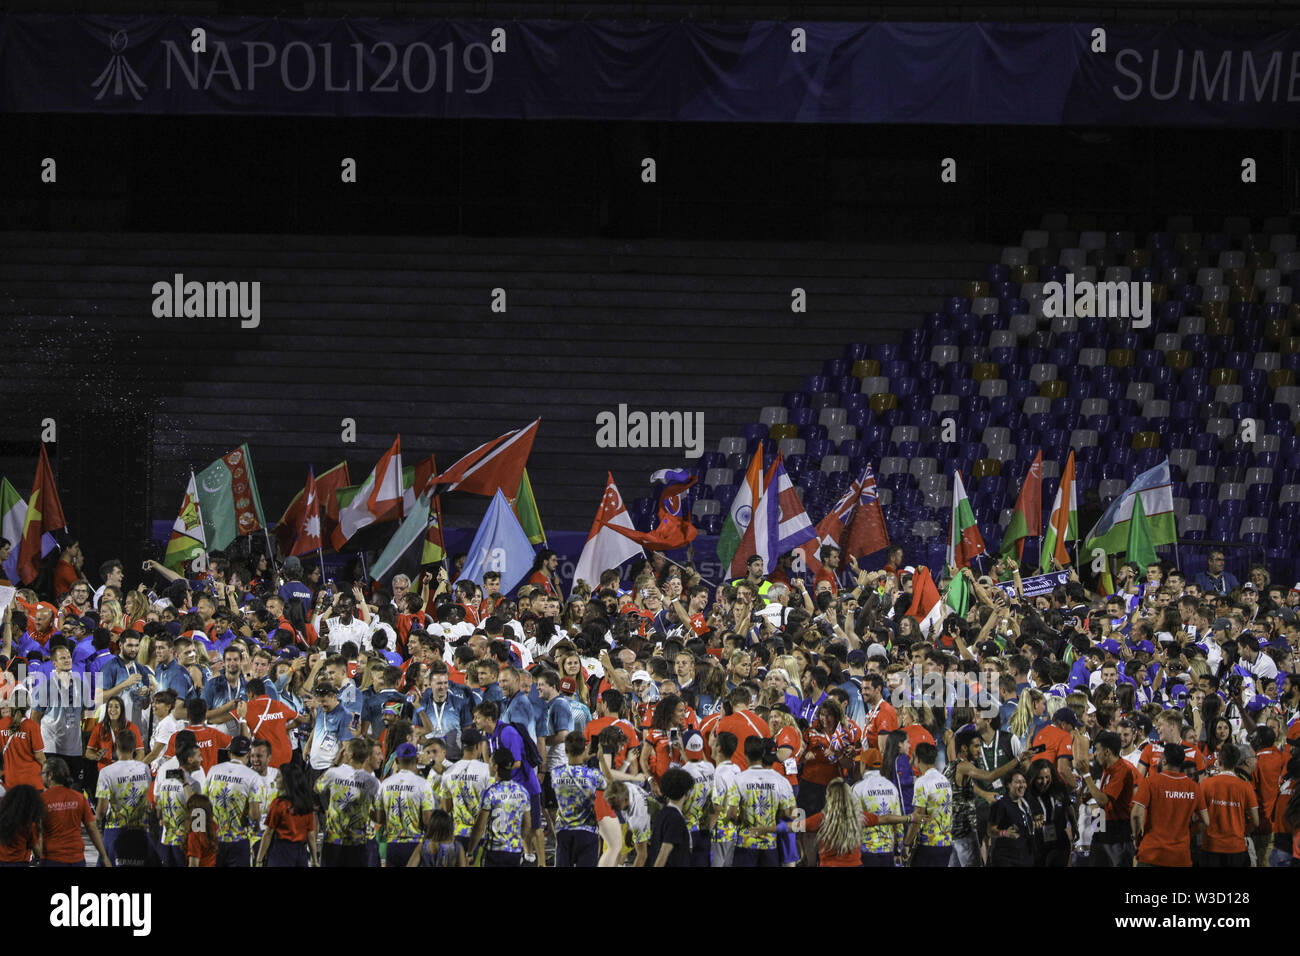 Naples, campania. 14th July, 2019. Italy, July 14, 2019 at the San Paolo stadium in Naples had the closing ceremony for the games open to university students. Credit: Fabio Sasso/ZUMA Wire/Alamy Live News Stock Photo